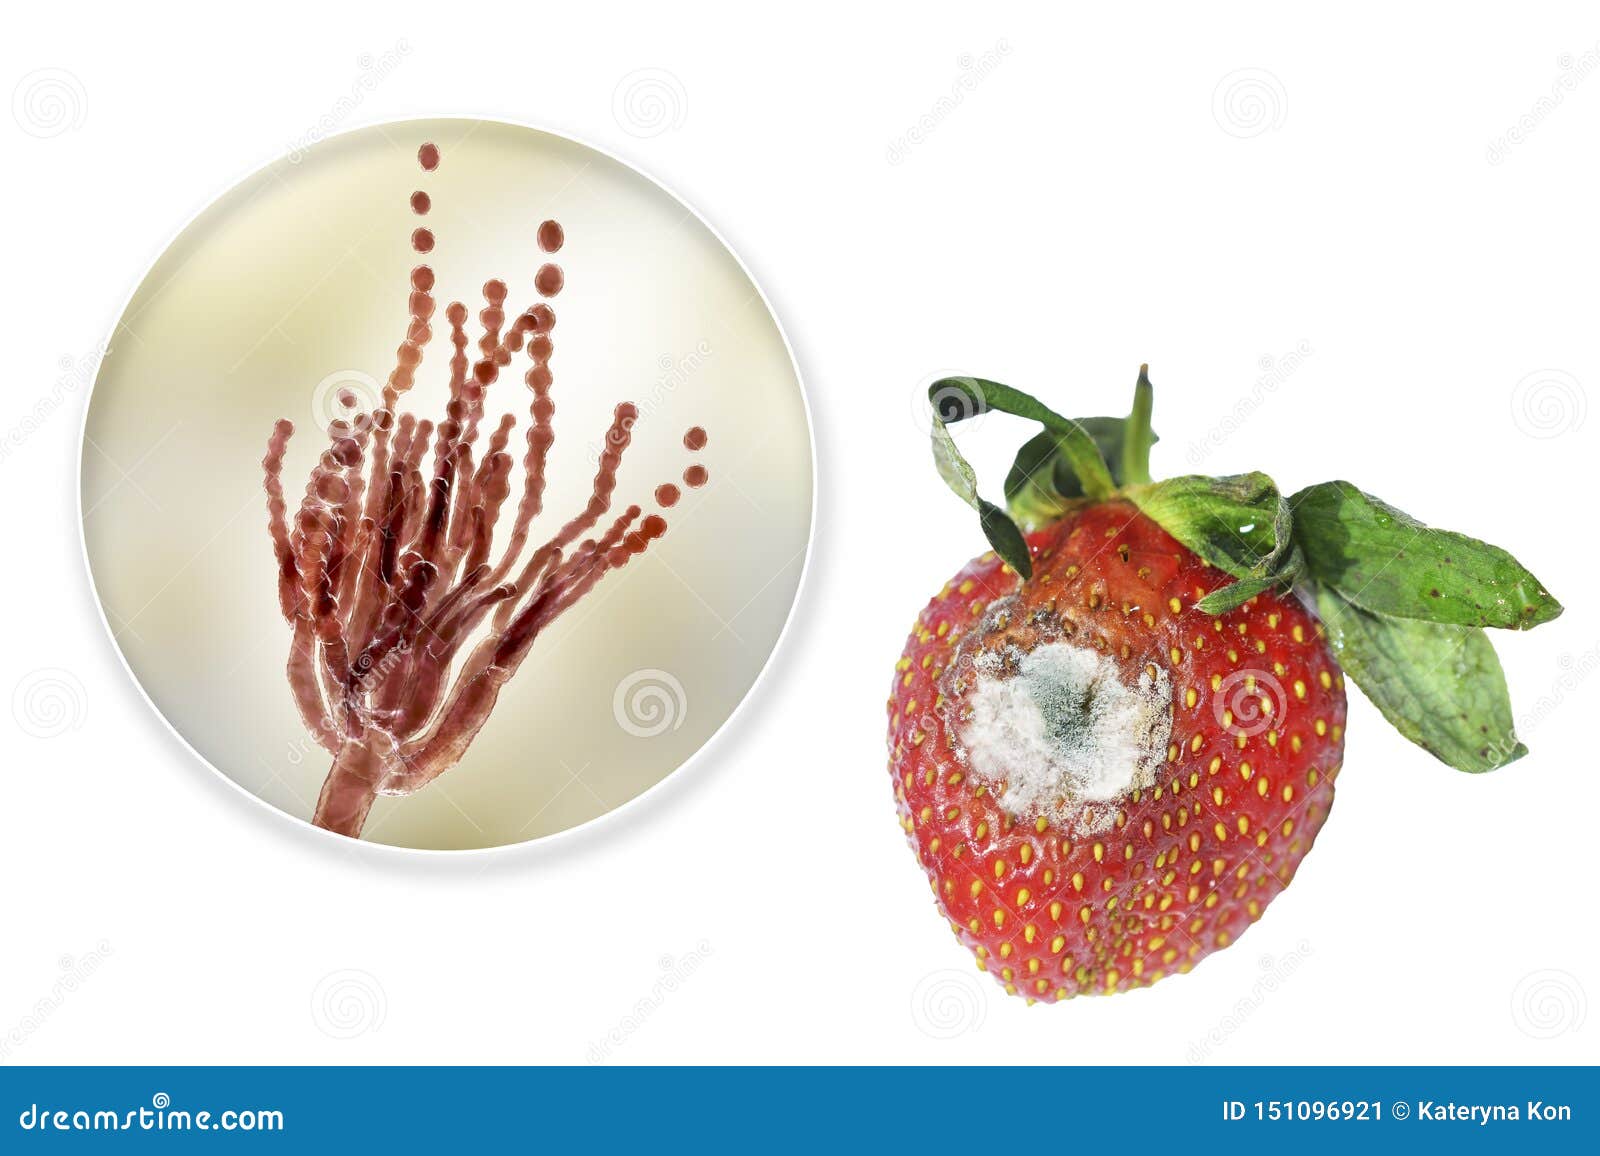 Strawberry with Molds and Closeup View of Mold Fungi Penicillium  Responsible for Food Spoilage Stock Image - Image of mold, biology:  151096921